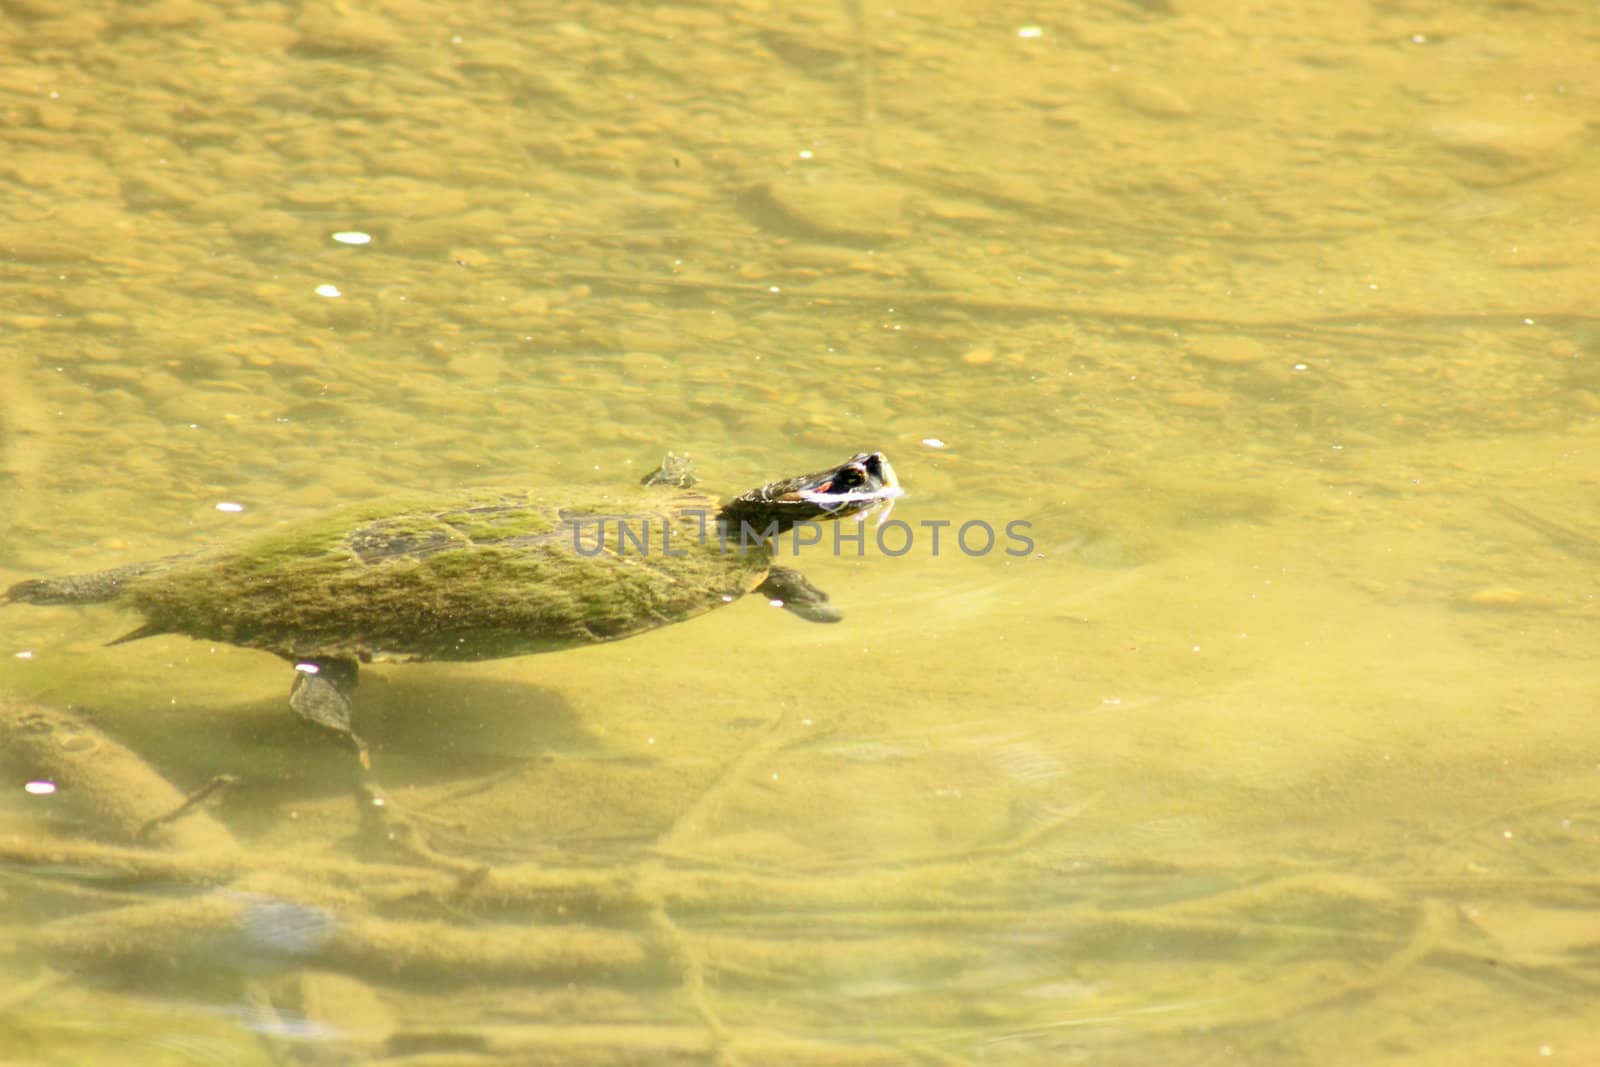 Red-eared slider turtle swimming in a shallow pond.